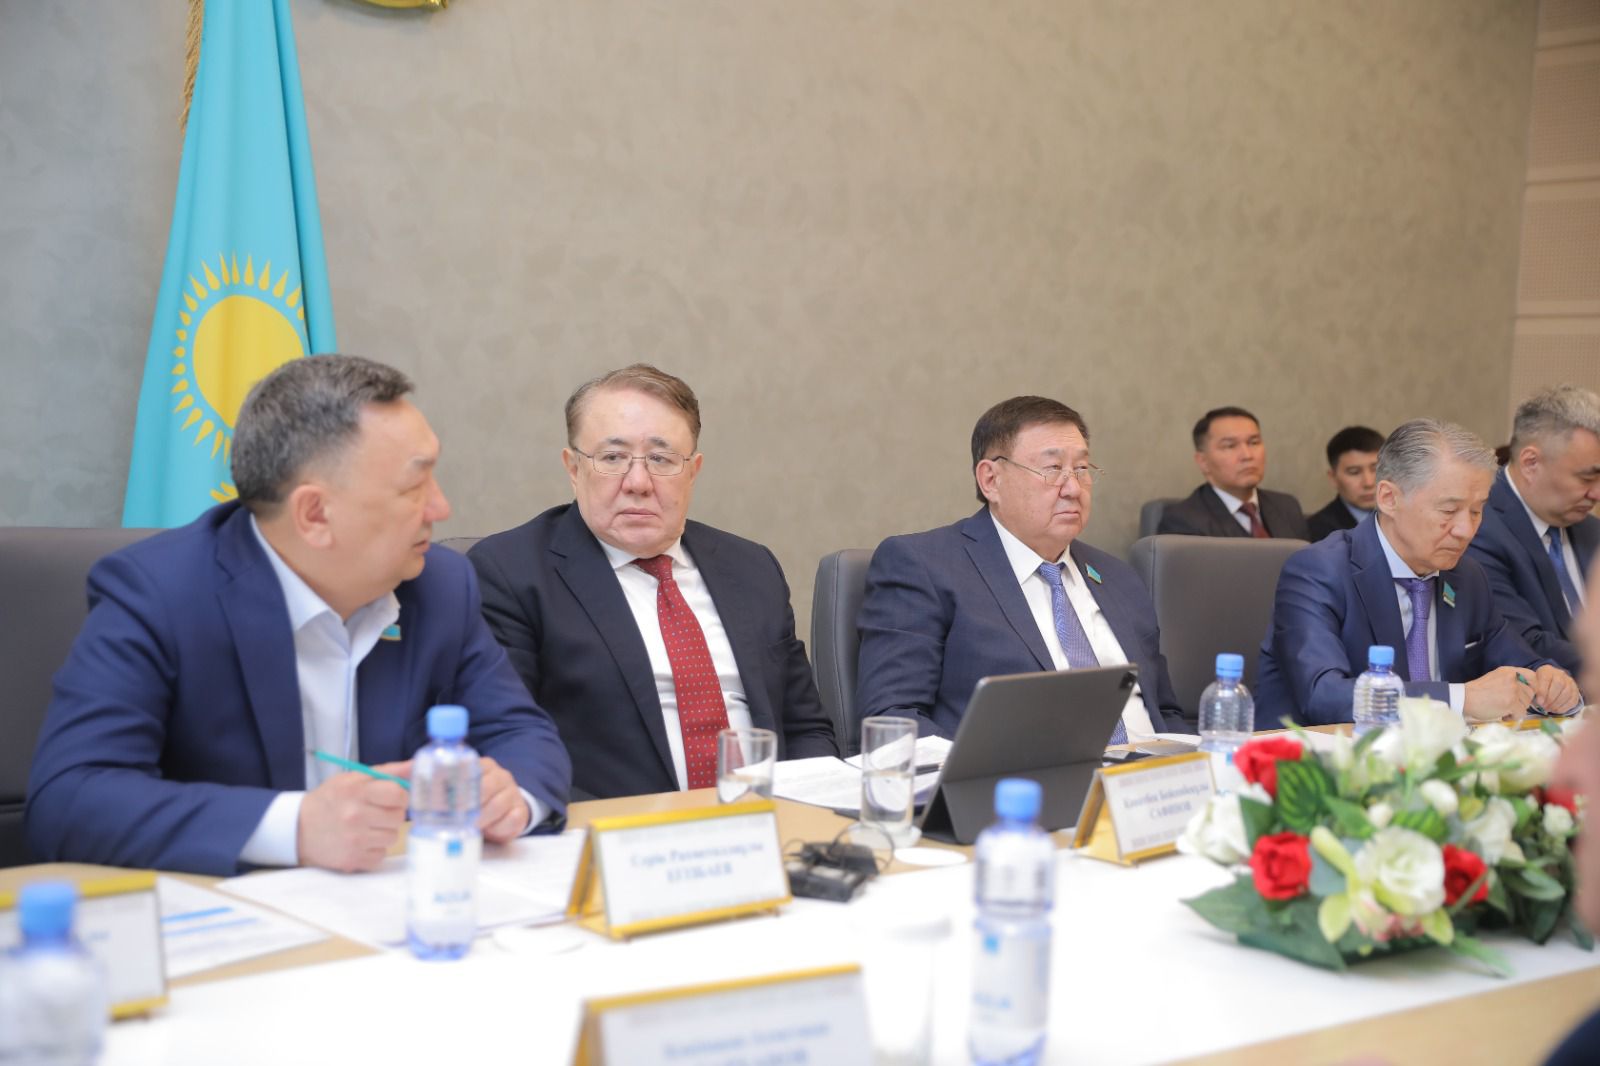 Kazakhstan is proposing to enact legislative measures aimed at providing state support for private subsidiary farms